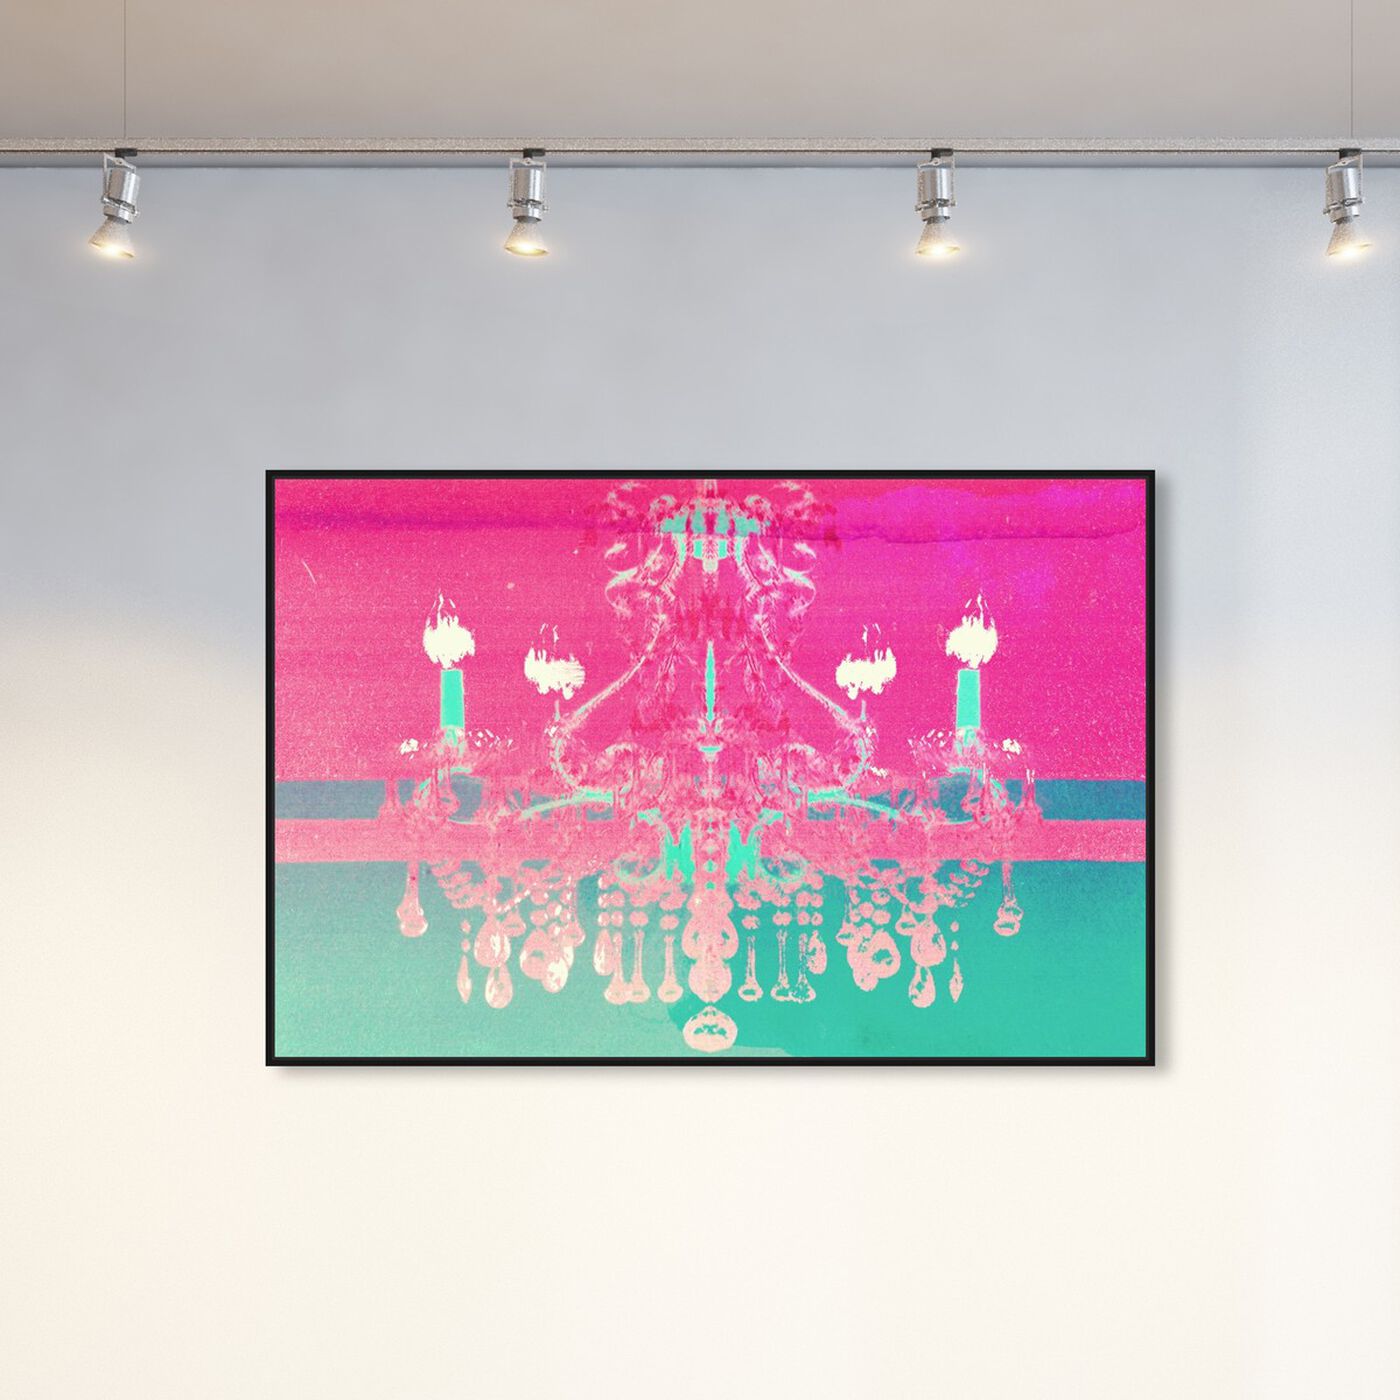 Hanging view of Adagio for Strings featuring fashion and glam and chandeliers art.